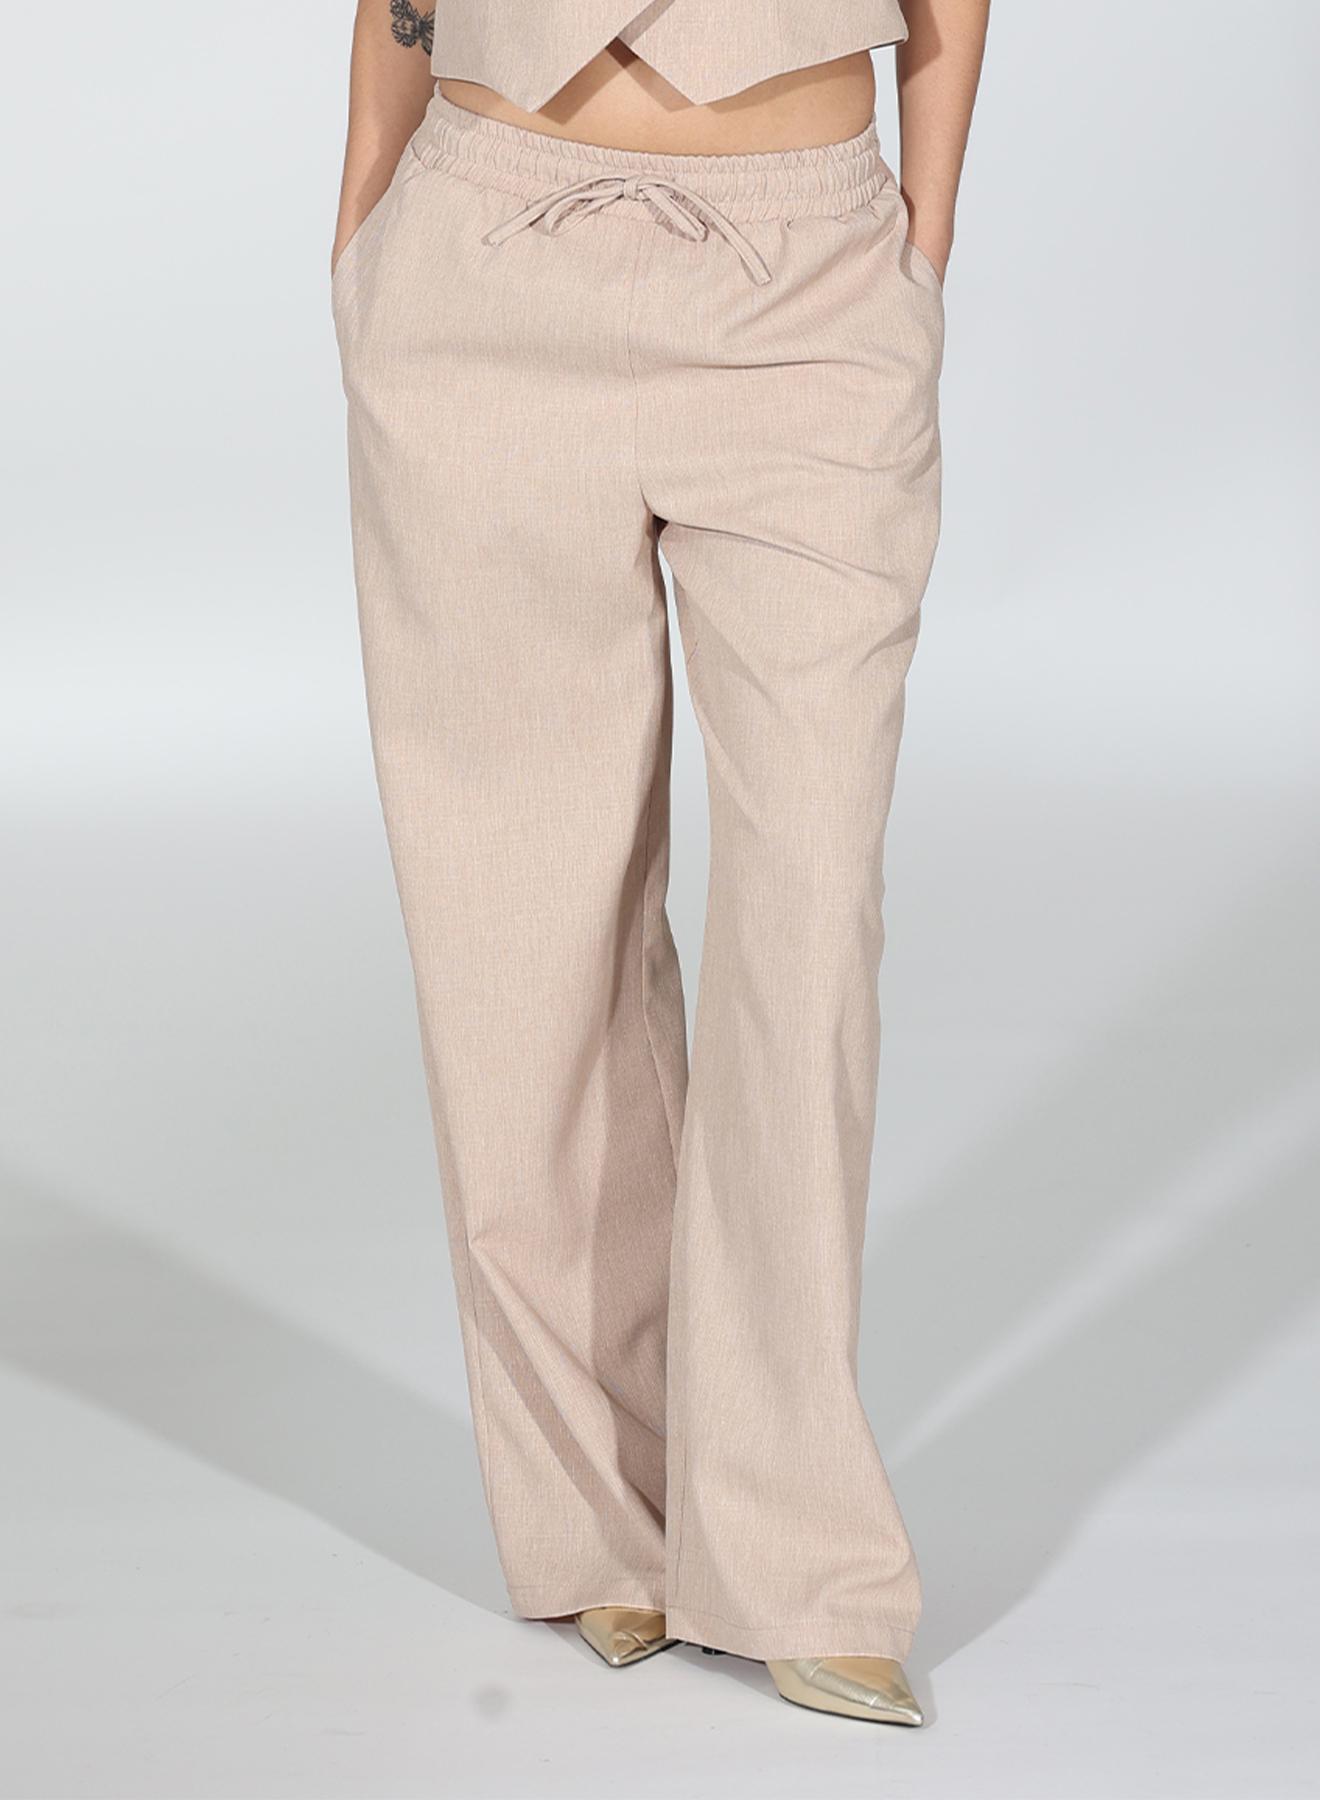 Beige wide legs Trousers with elastic waistband ties with cord R.R - 2